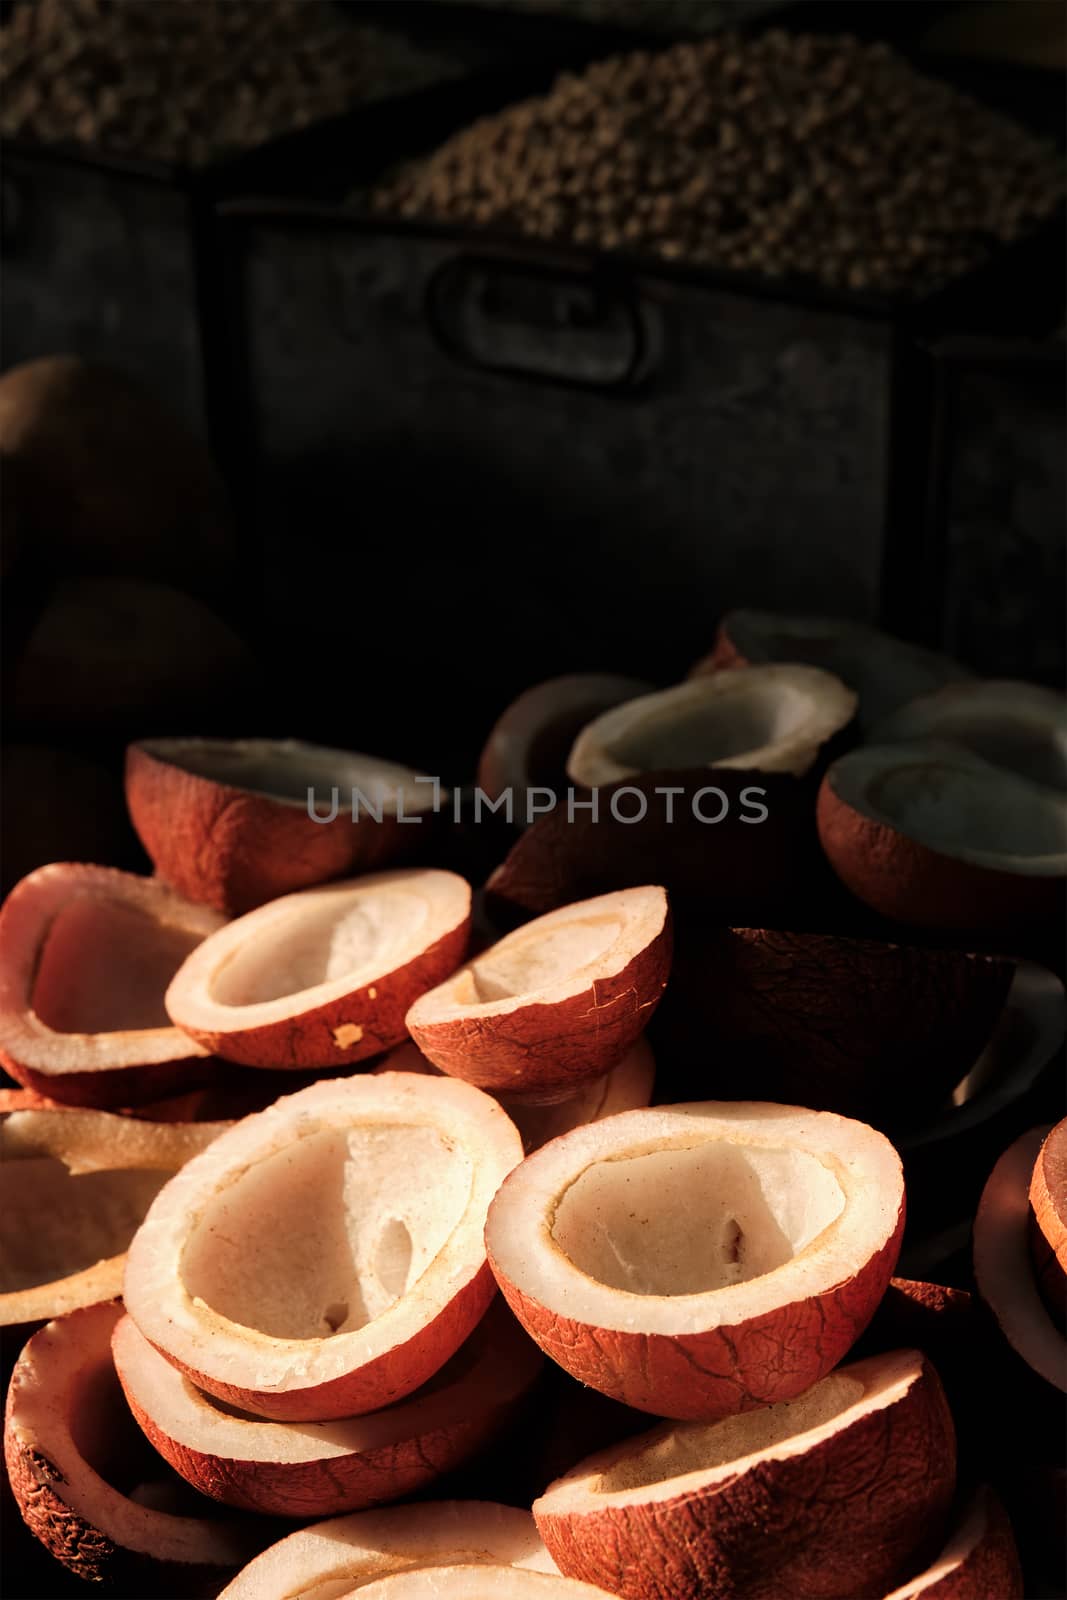 Coconuts in vegetable market in street lit by sun in India by dimol